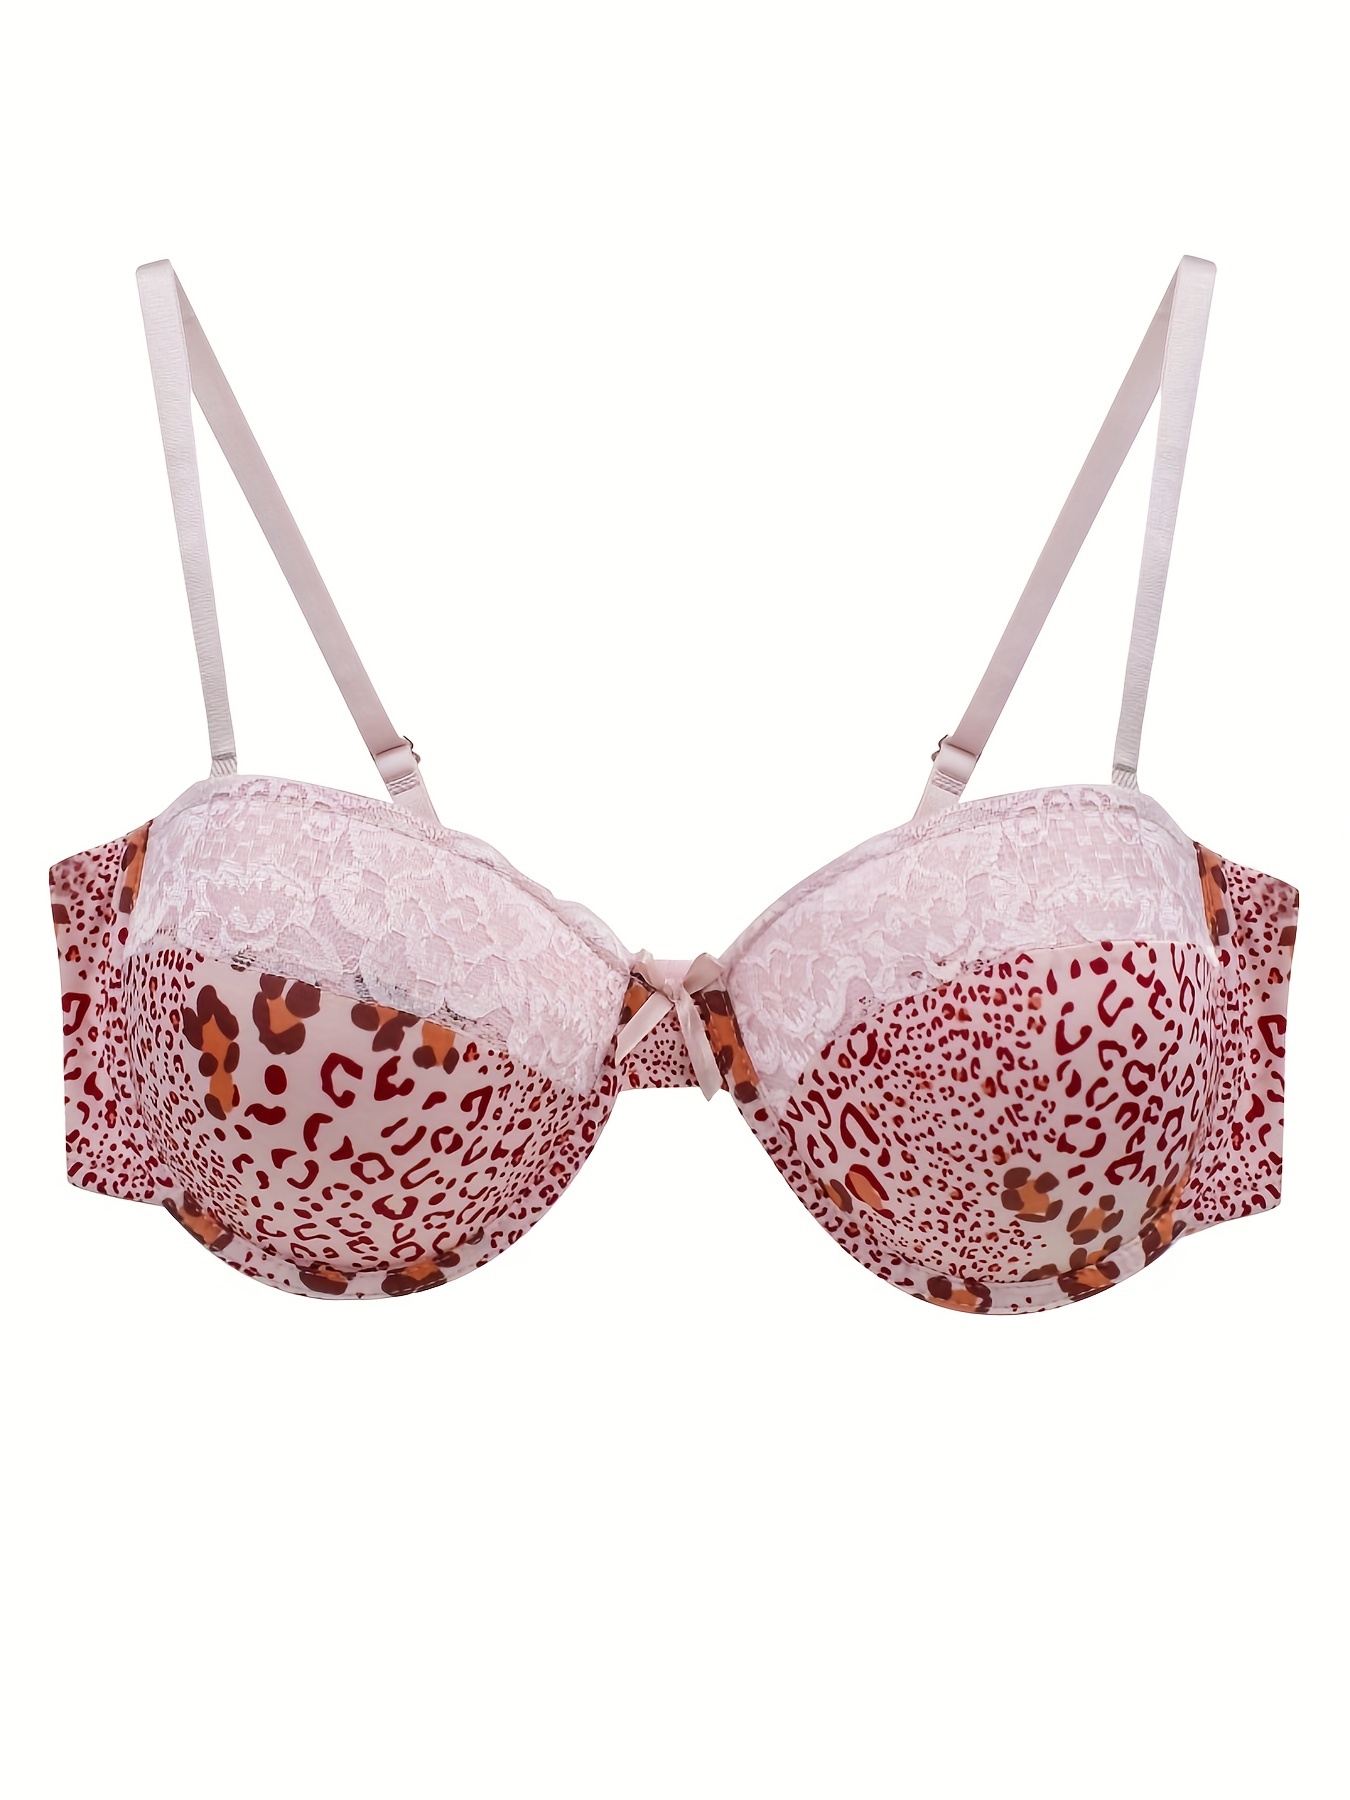 Red Leopard Lace Push Up Bra